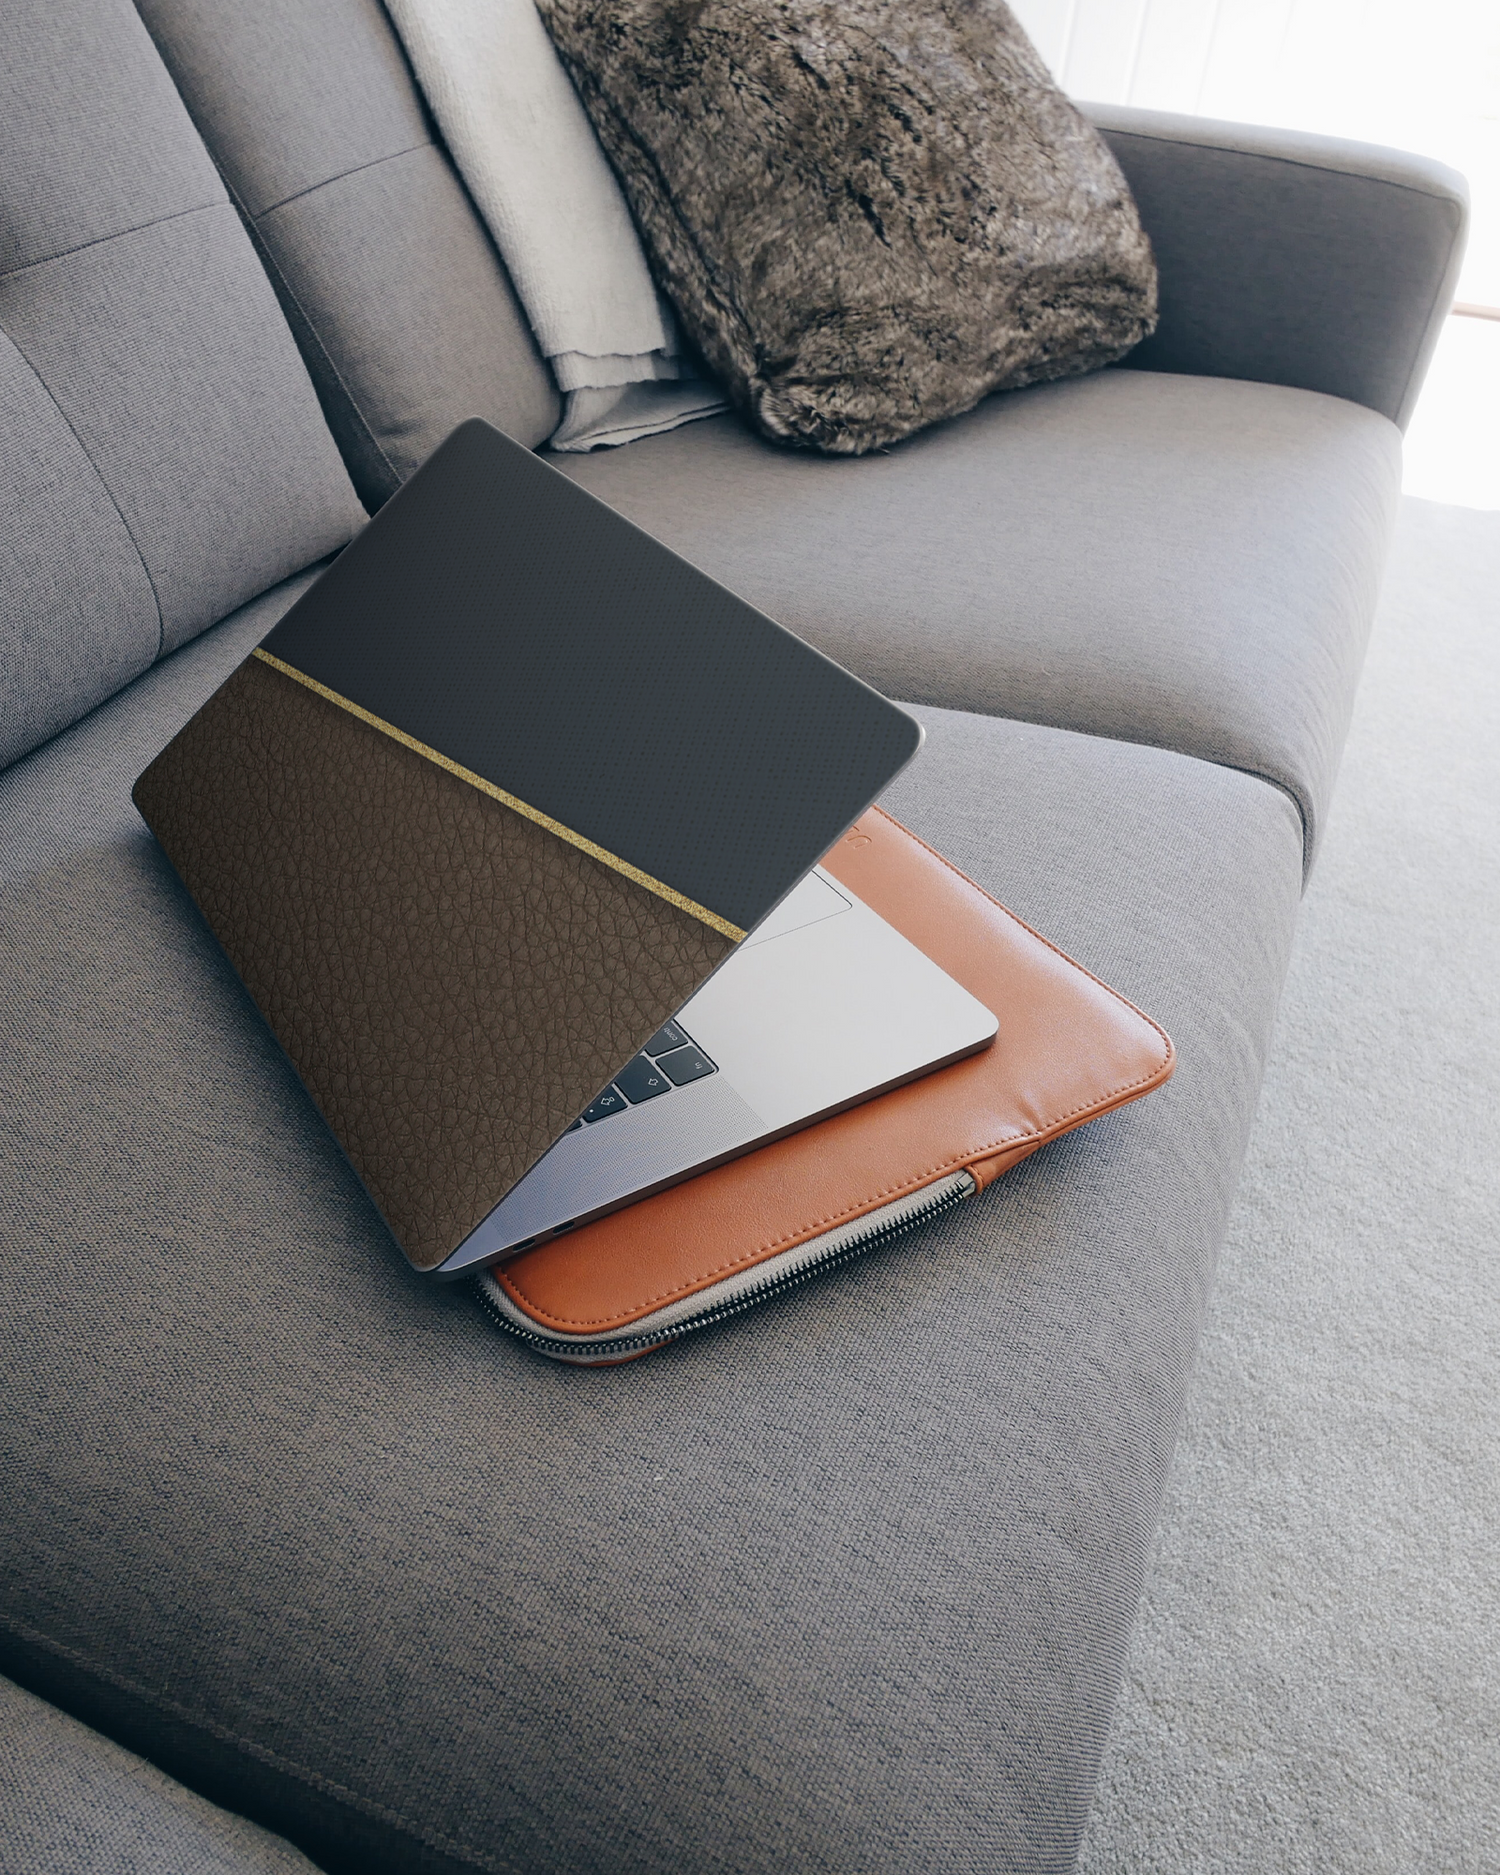 Oxford Laptop Skin for 15 inch Apple MacBooks on a couch